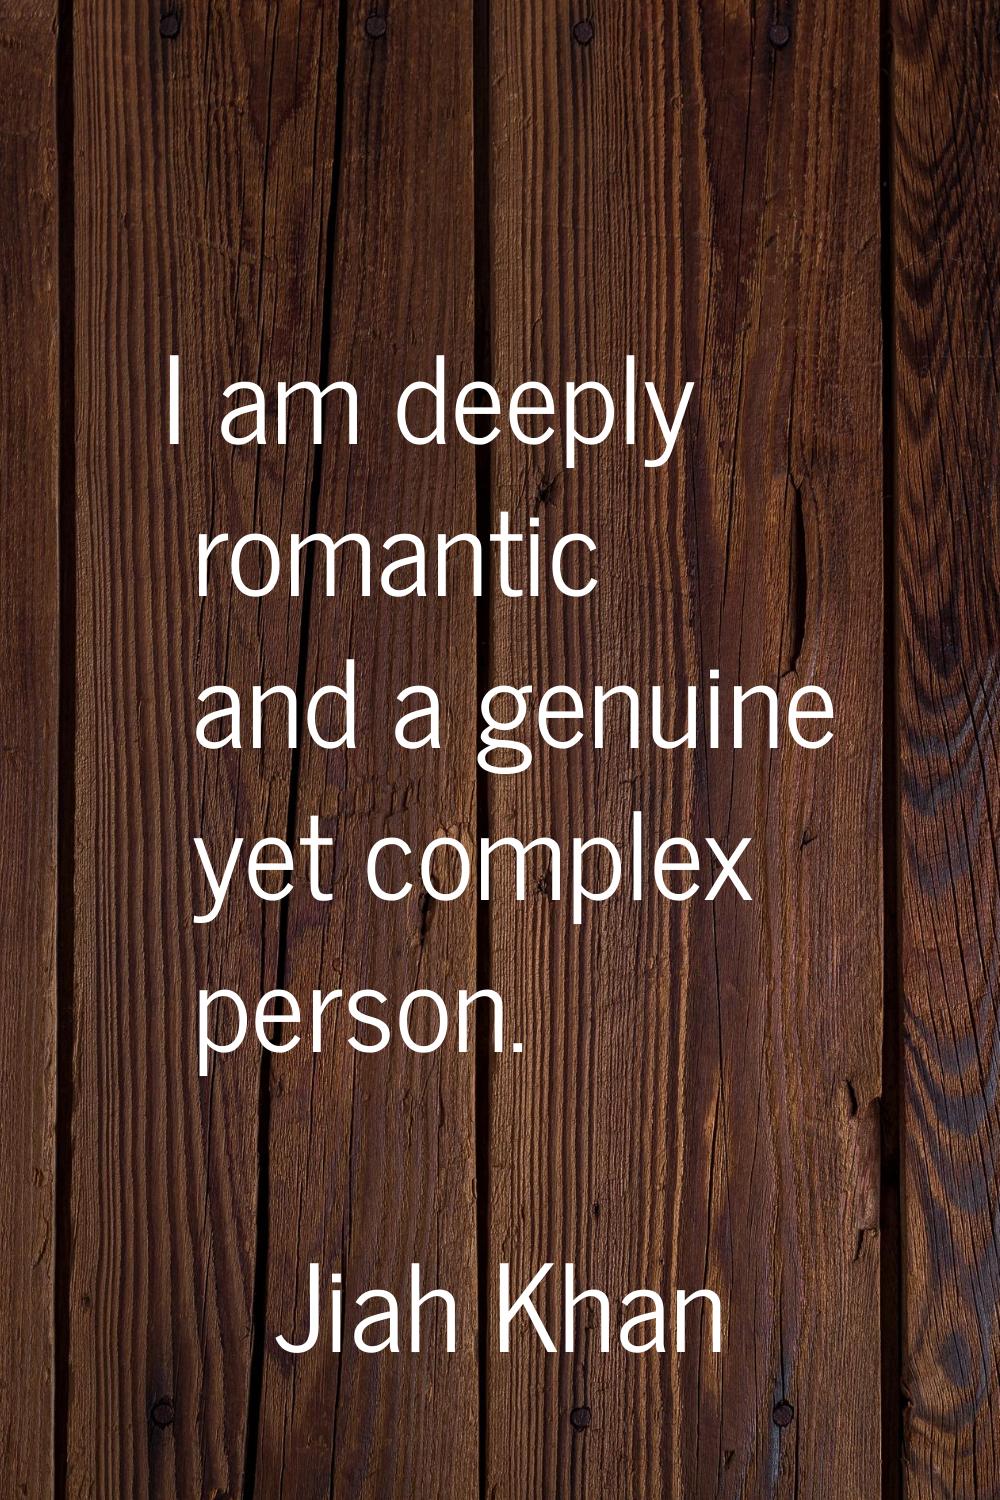 I am deeply romantic and a genuine yet complex person.